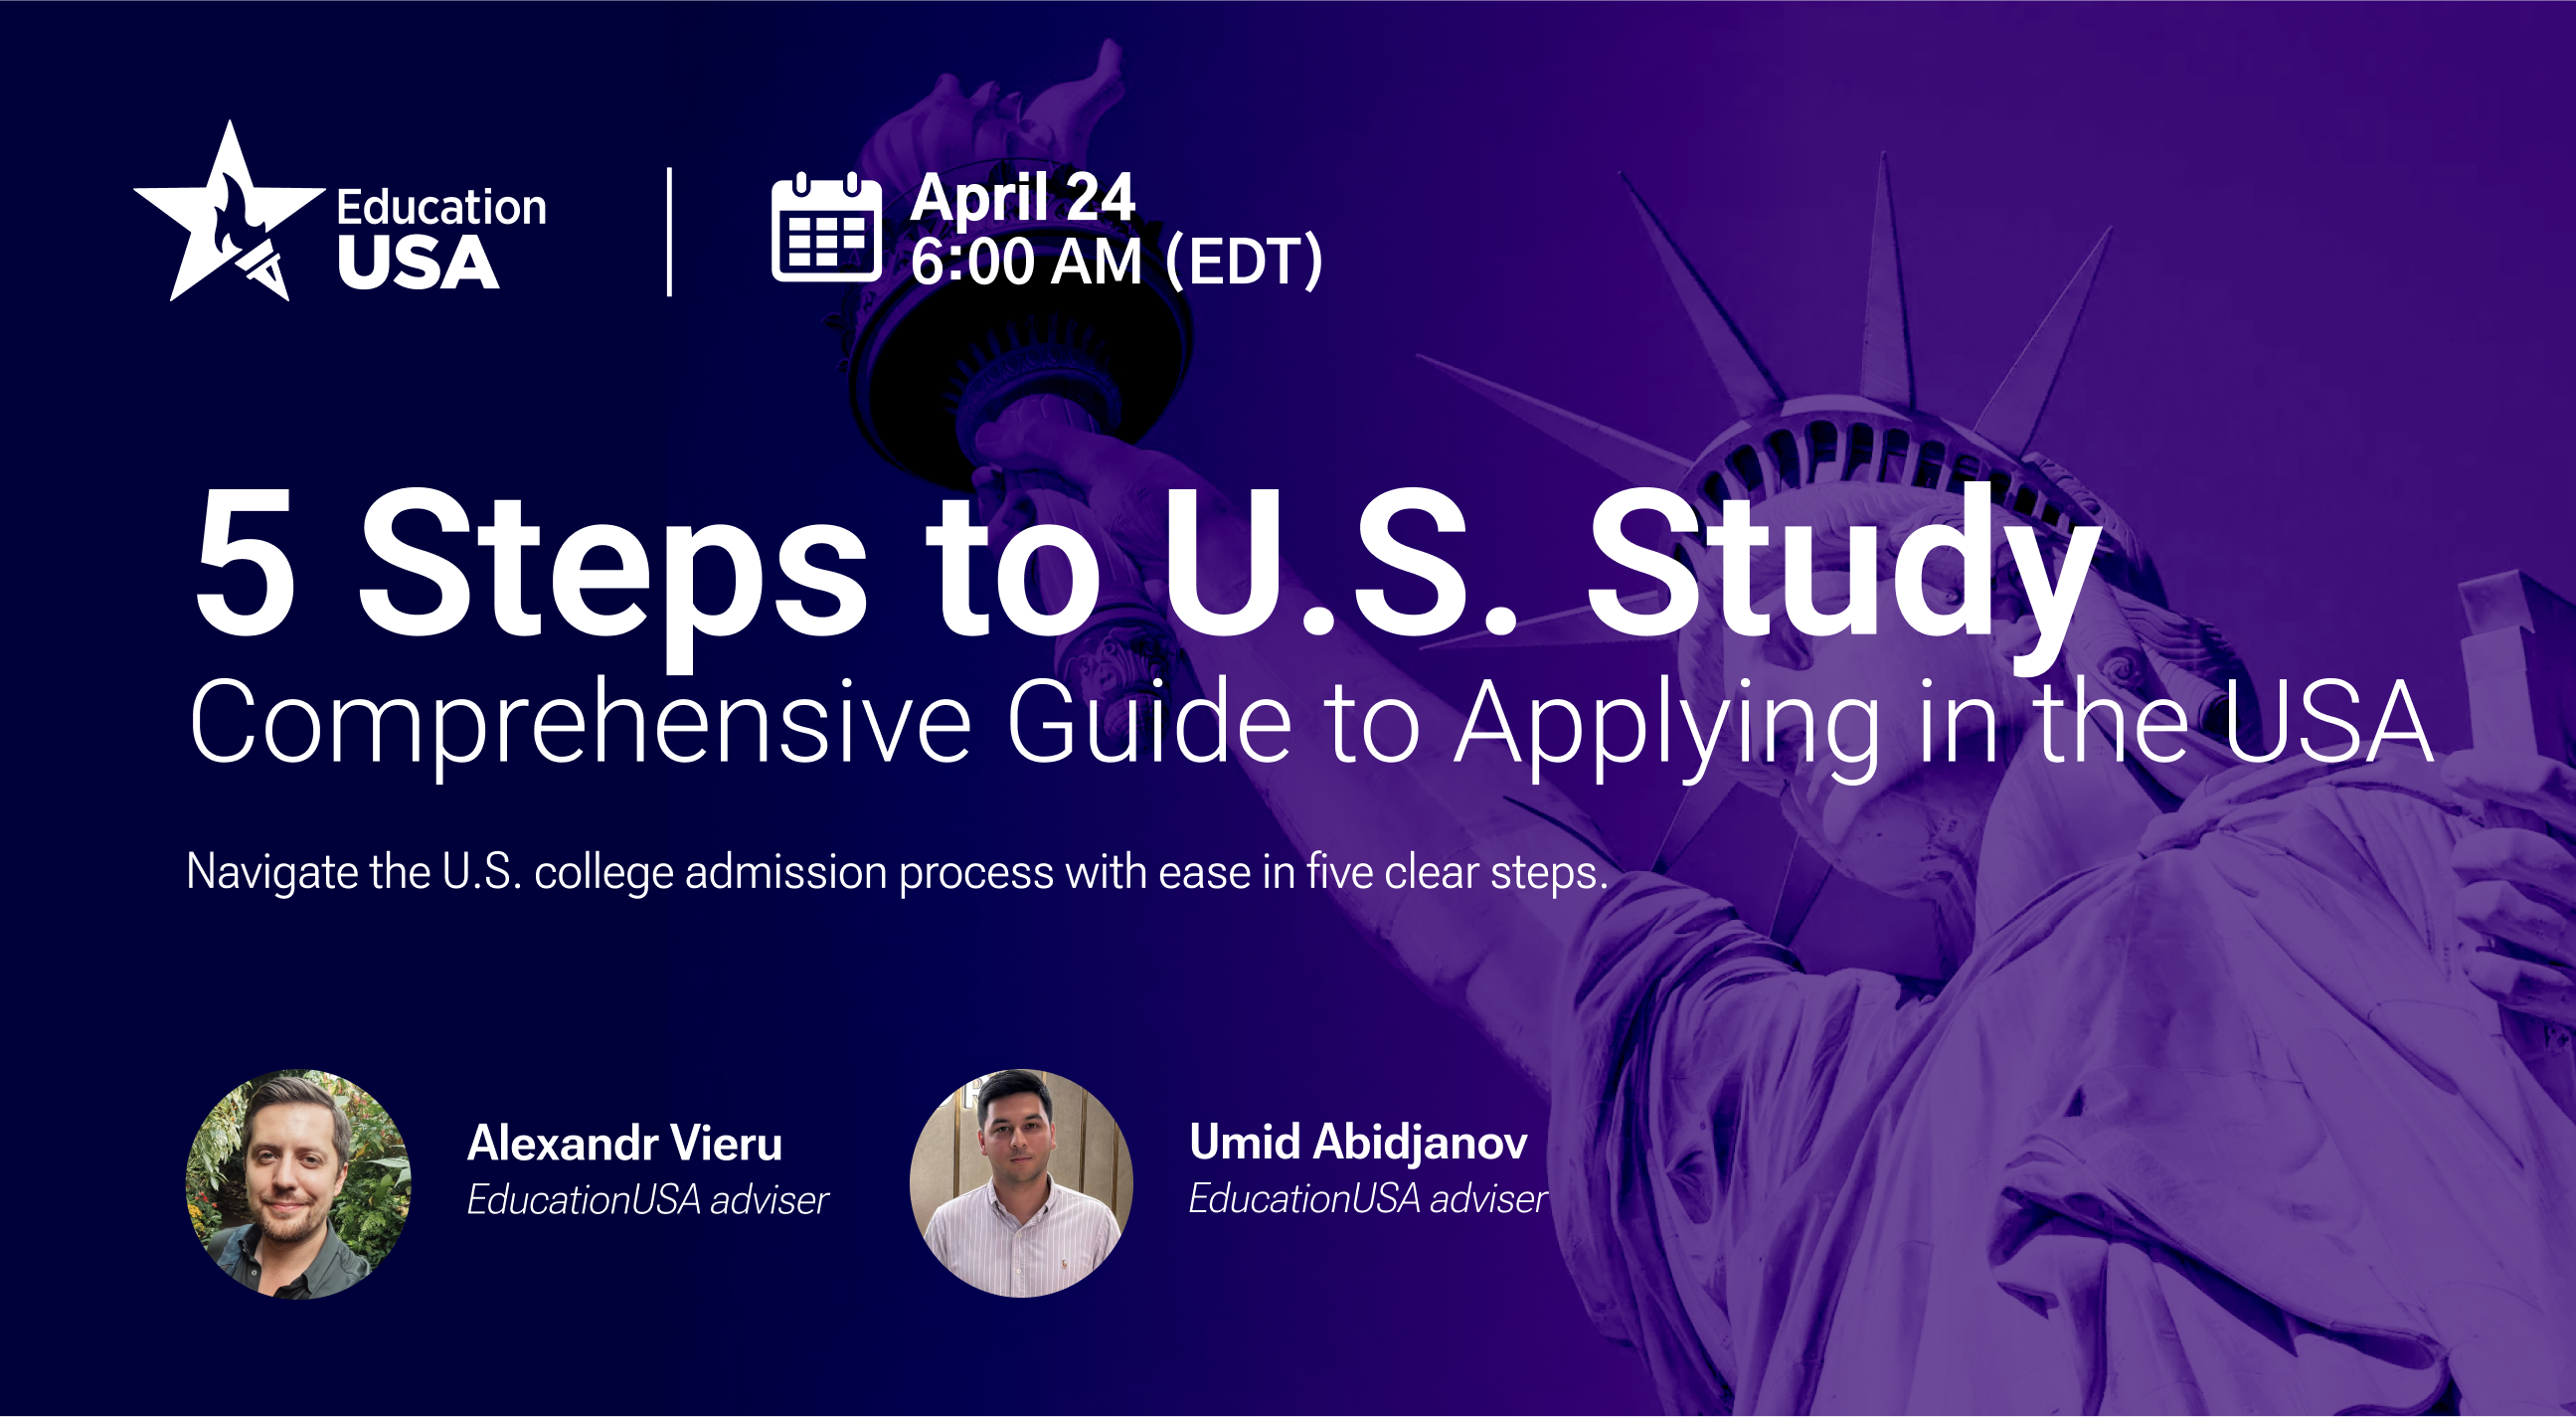 5 Steps to U.S. Study: A Comprehensive Guide to Applying in the USA